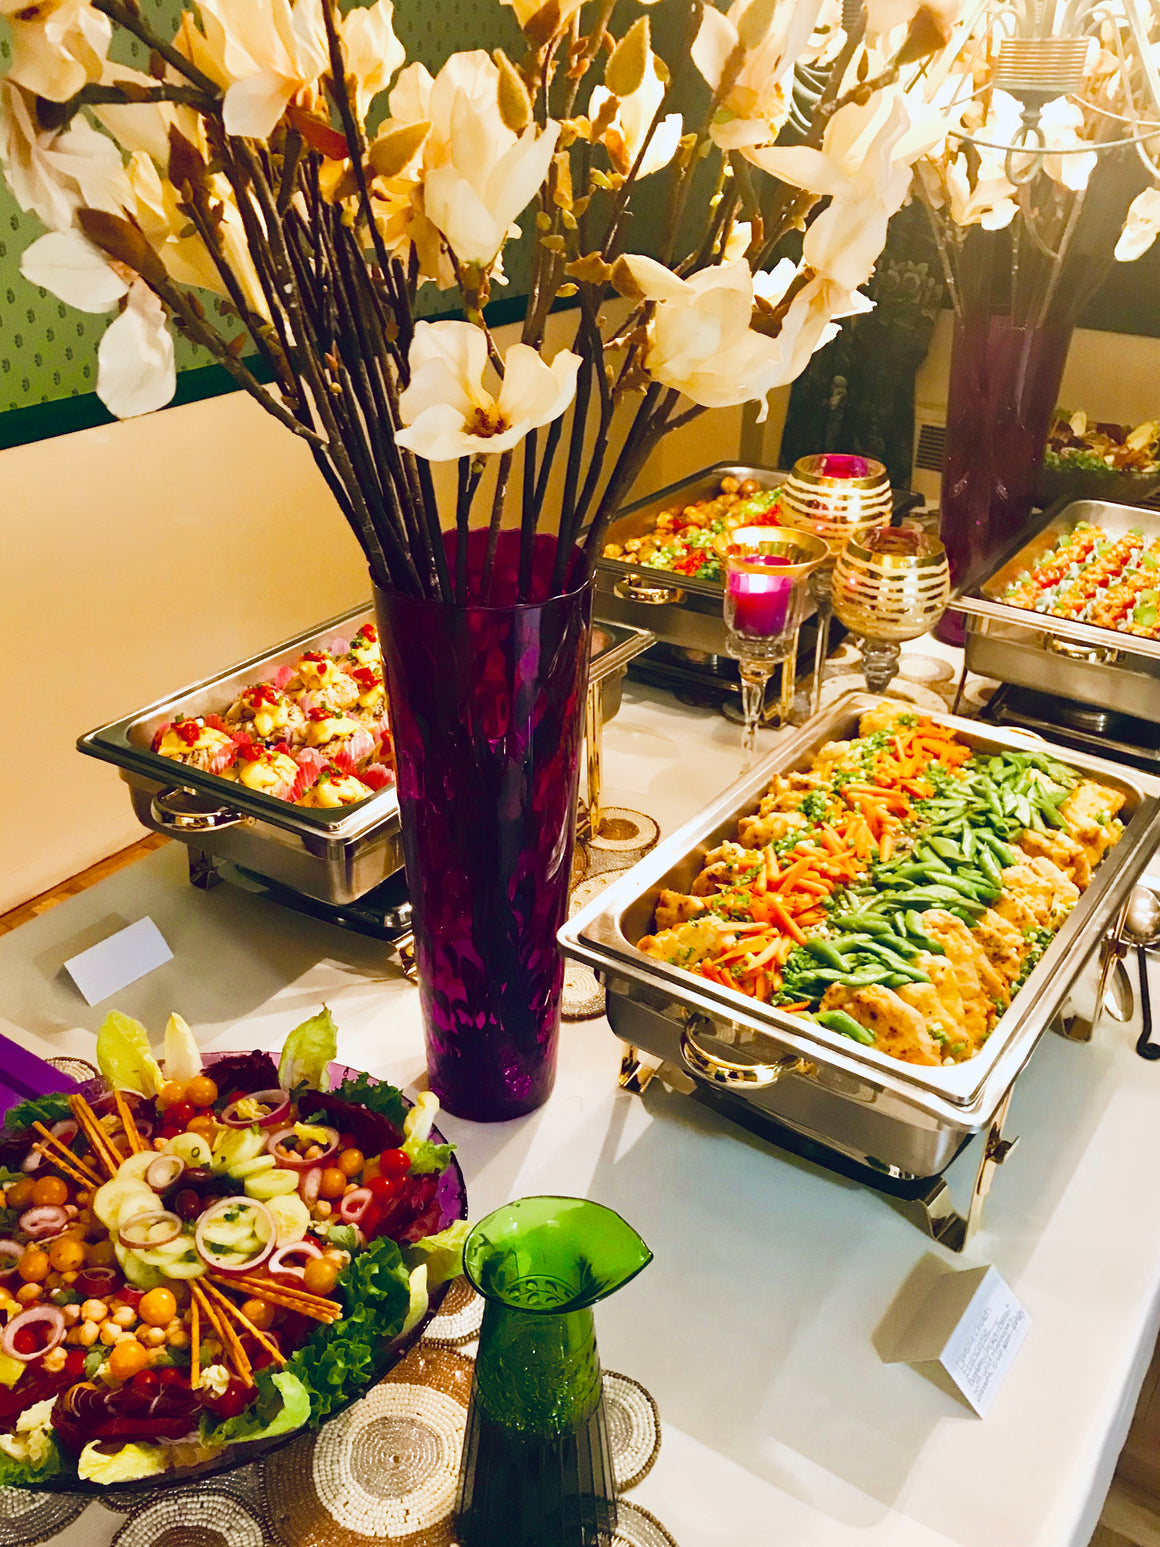 Dinner Combinations - Hot Buffet Style Full Service Or Drop Off